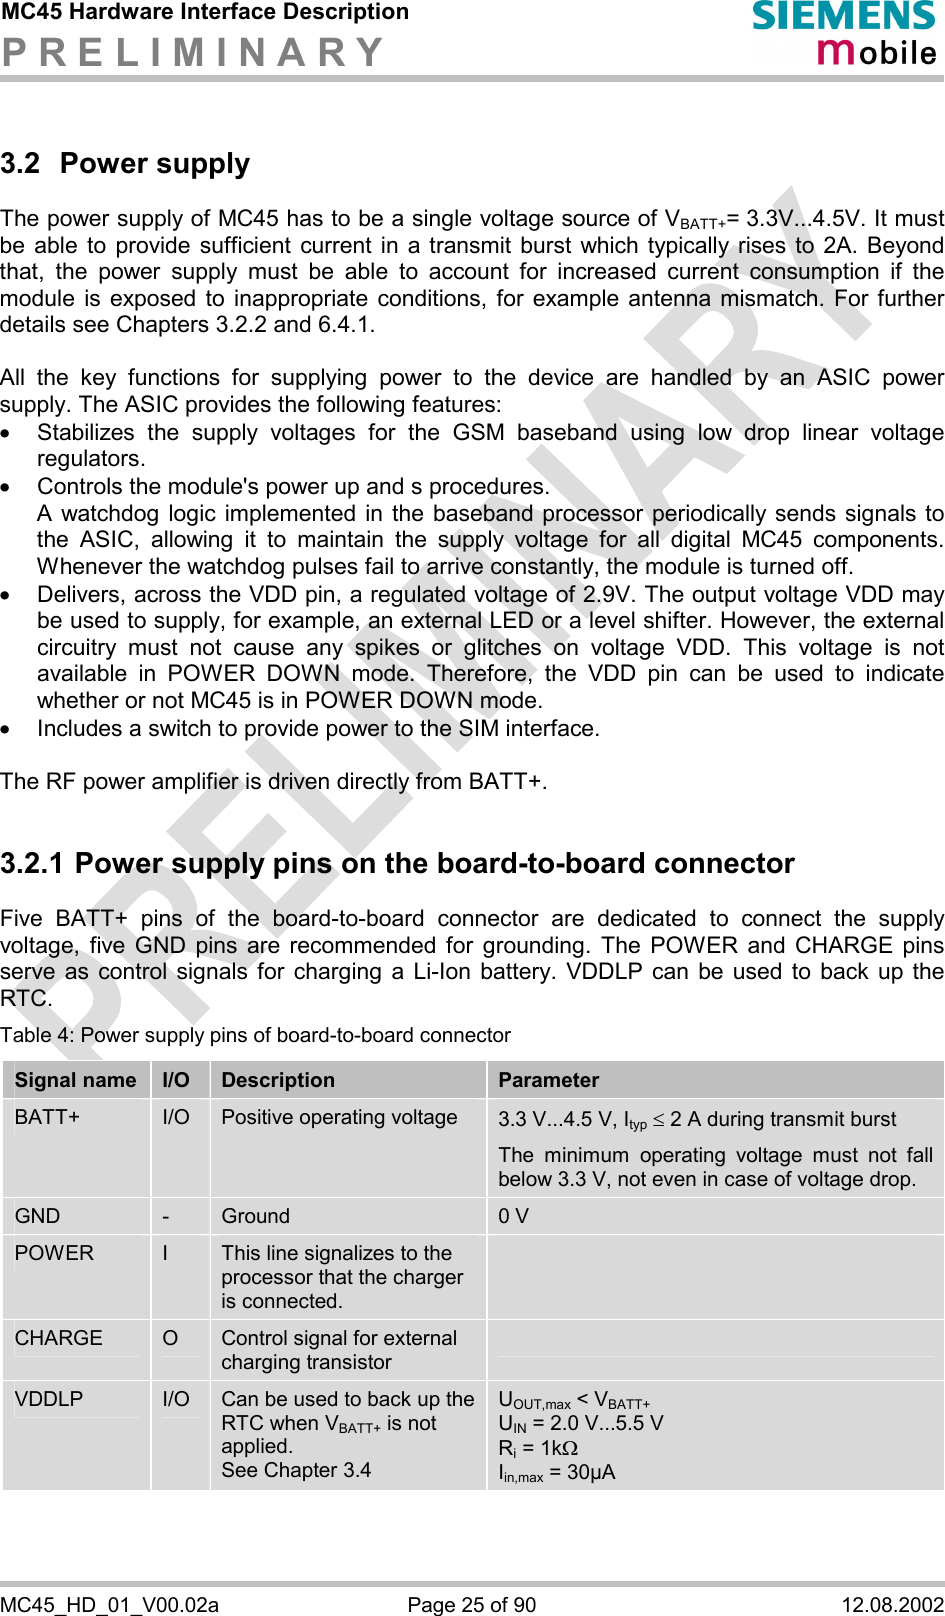 MC45 Hardware Interface Description P R E L I M I N A R Y      MC45_HD_01_V00.02a  Page 25 of 90  12.08.2002 3.2 Power supply The power supply of MC45 has to be a single voltage source of VBATT+= 3.3V...4.5V. It must be able to provide sufficient current in a transmit burst which typically rises to 2A. Beyond that, the power supply must be able to account for increased current consumption if the module is exposed to inappropriate conditions, for example antenna mismatch. For further details see Chapters 3.2.2 and 6.4.1.  All the key functions for supplying power to the device are handled by an ASIC power supply. The ASIC provides the following features: ·  Stabilizes the supply voltages for the GSM baseband using low drop linear voltage regulators.  ·  Controls the module&apos;s power up and s procedures.  A watchdog logic implemented in the baseband processor periodically sends signals to the ASIC, allowing it to maintain the supply voltage for all digital MC45 components. Whenever the watchdog pulses fail to arrive constantly, the module is turned off.  ·  Delivers, across the VDD pin, a regulated voltage of 2.9V. The output voltage VDD may be used to supply, for example, an external LED or a level shifter. However, the external circuitry must not cause any spikes or glitches on voltage VDD. This voltage is not available in POWER DOWN mode. Therefore, the VDD pin can be used to indicate whether or not MC45 is in POWER DOWN mode. ·  Includes a switch to provide power to the SIM interface.  The RF power amplifier is driven directly from BATT+.  3.2.1 Power supply pins on the board-to-board connector Five BATT+ pins of the board-to-board connector are dedicated to connect the supply voltage, five GND pins are recommended for grounding. The POWER and CHARGE pins serve as control signals for charging a Li-Ion battery. VDDLP can be used to back up the RTC. Table 4: Power supply pins of board-to-board connector Signal name  I/O  Description  Parameter BATT+  I/O  Positive operating voltage  3.3 V...4.5 V, Ityp £ 2 A during transmit burst The minimum operating voltage must not fall below 3.3 V, not even in case of voltage drop. GND  -  Ground  0 V POWER  I  This line signalizes to the processor that the charger is connected.  CHARGE  O  Control signal for external charging transistor  VDDLP  I/O  Can be used to back up the RTC when VBATT+ is not applied.  See Chapter 3.4 UOUT,max &lt; VBATT+ UIN = 2.0 V...5.5 V Ri = 1kW Iin,max = 30µA  